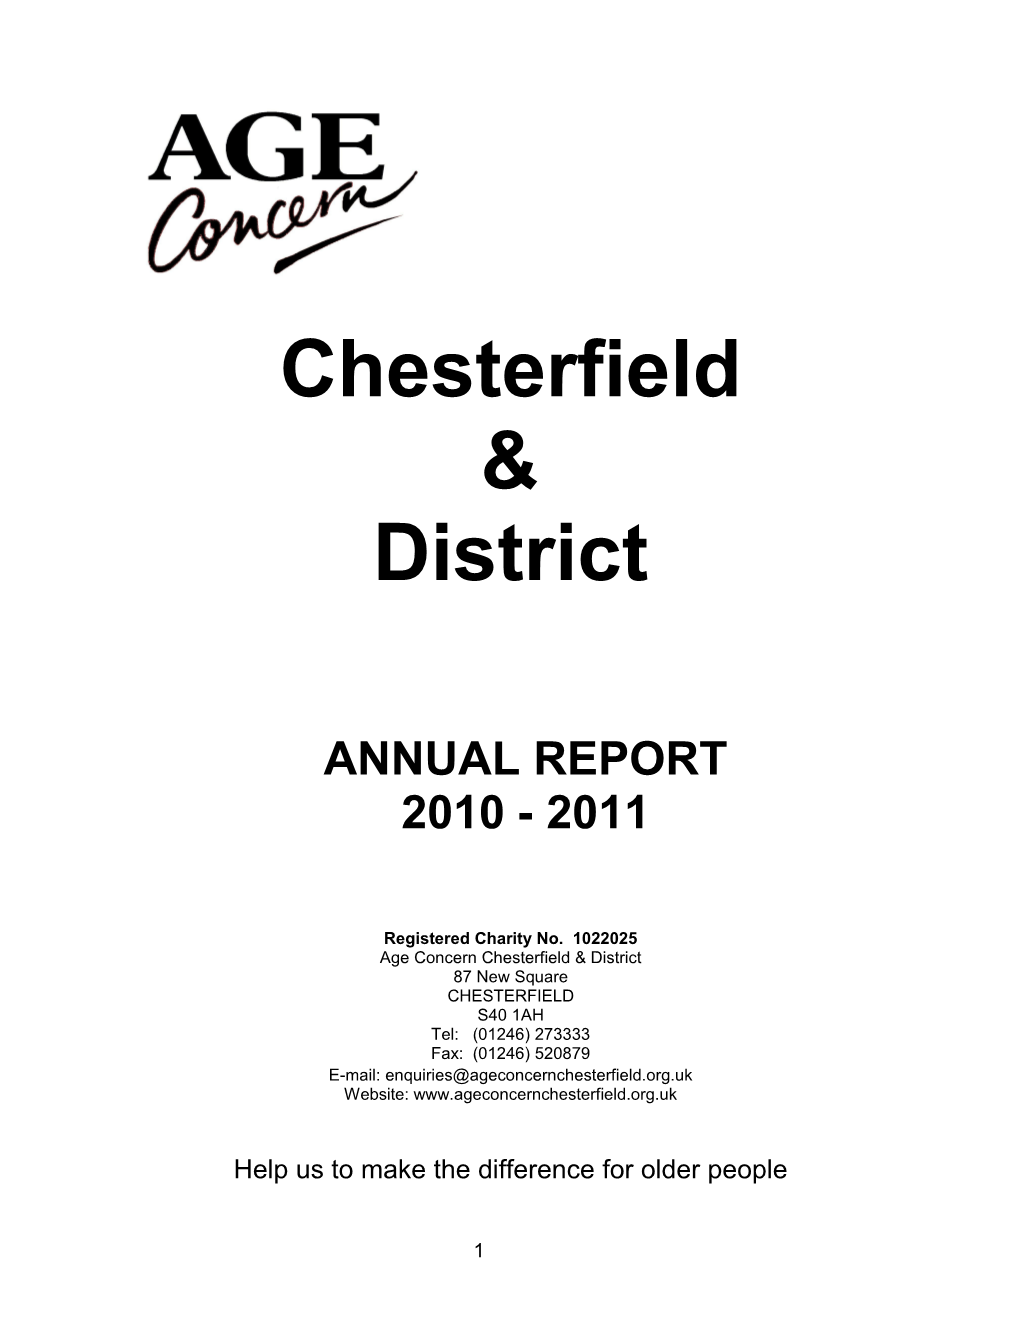 Chesterfield & District